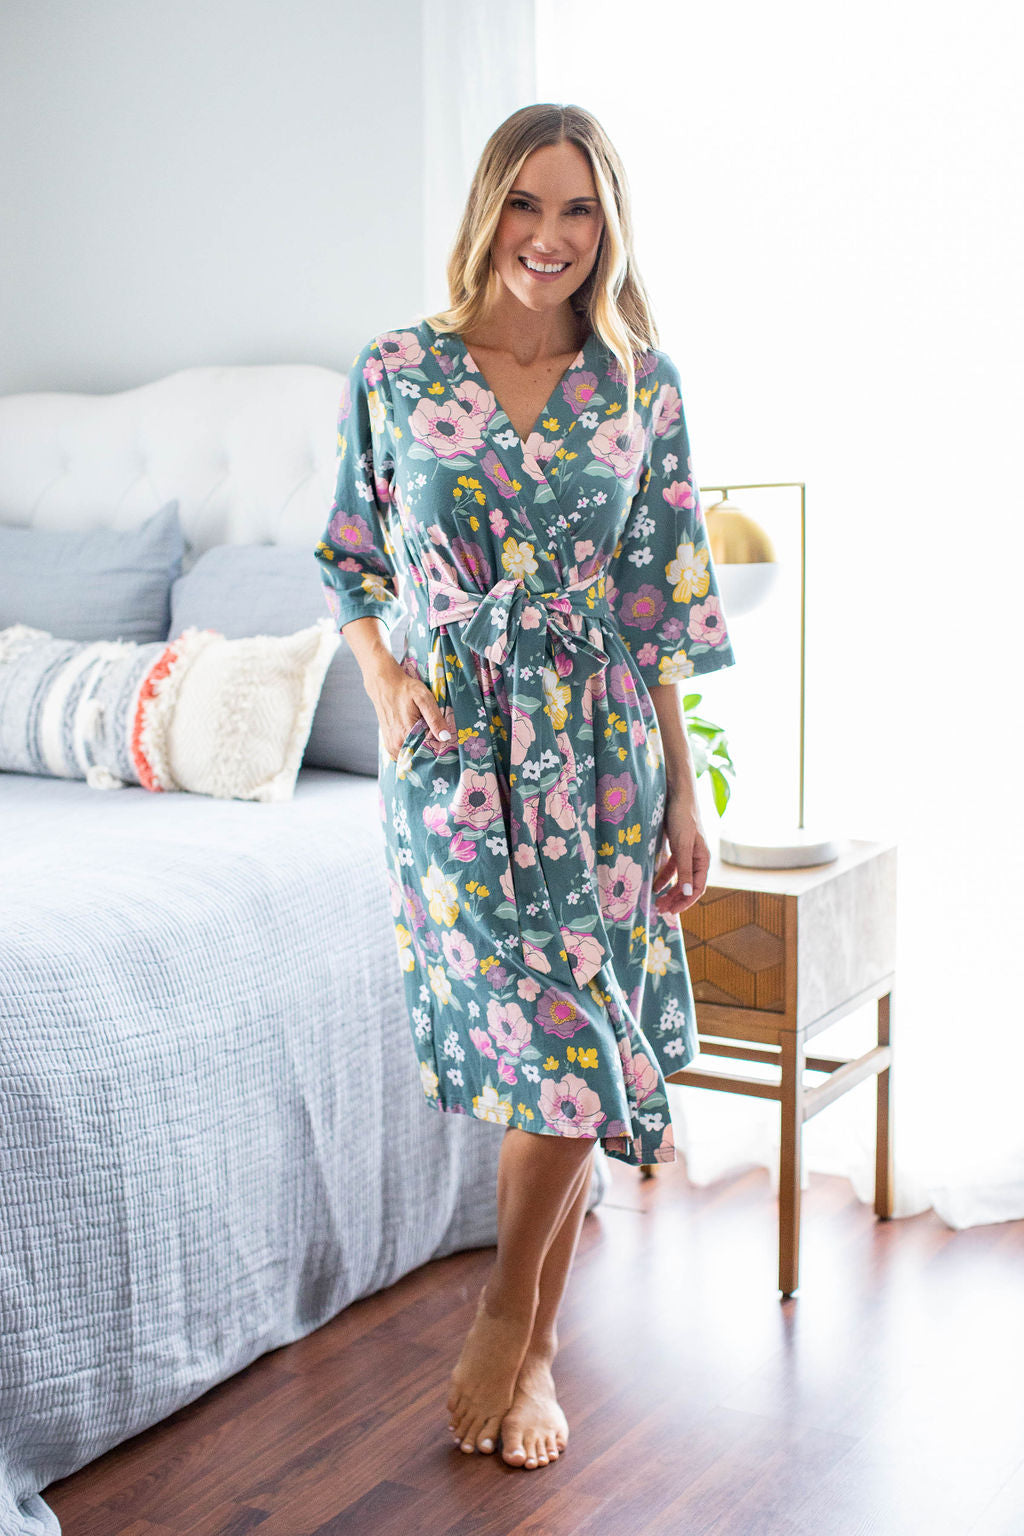 Charlotte maternity robe with pockets, belt closure, and knee length. 3/4 sleeve length for IV access. Pink and yellow flowers against green background.